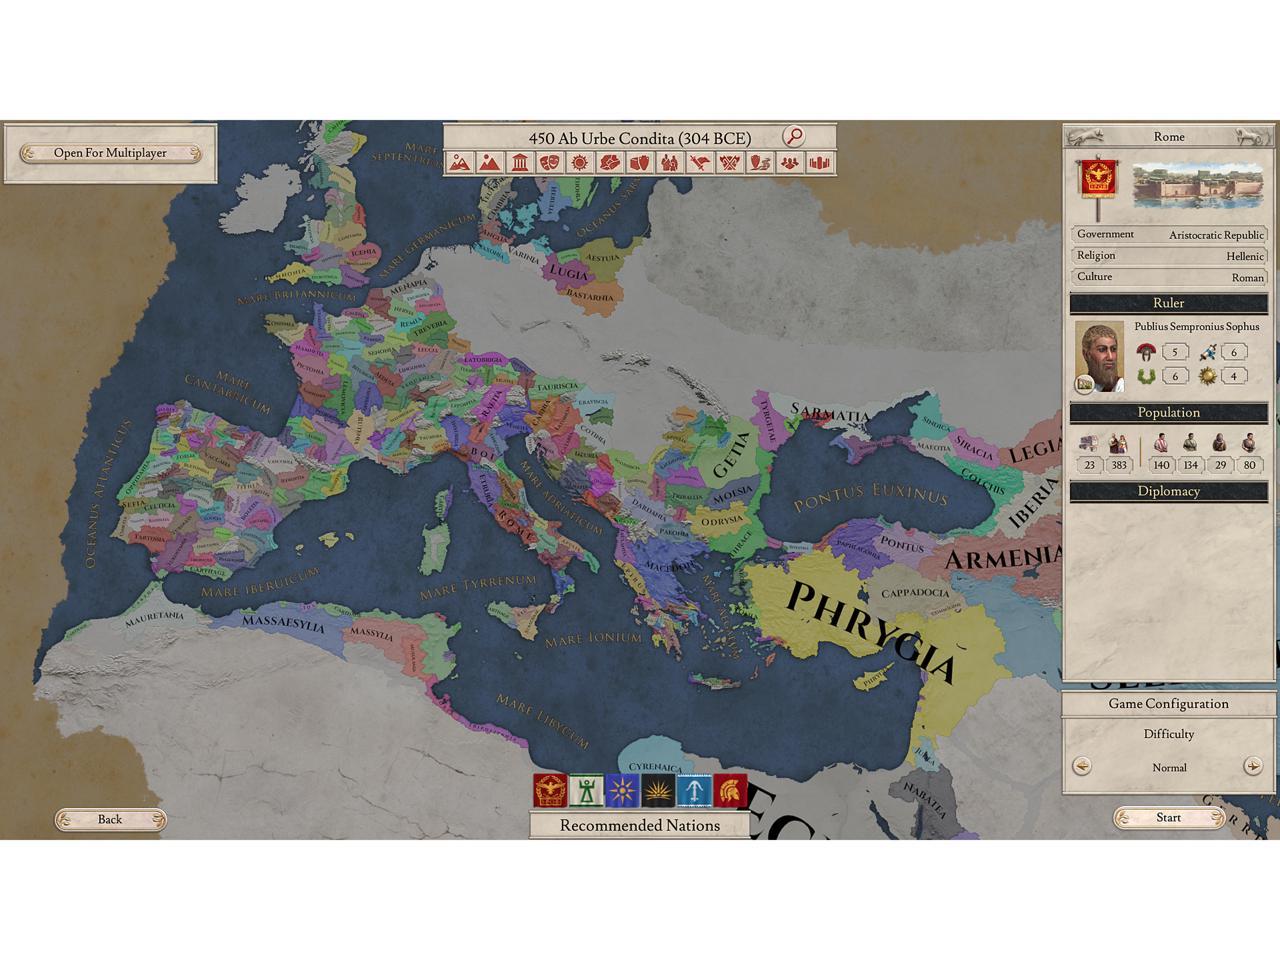 europa universalis 5 how to change color